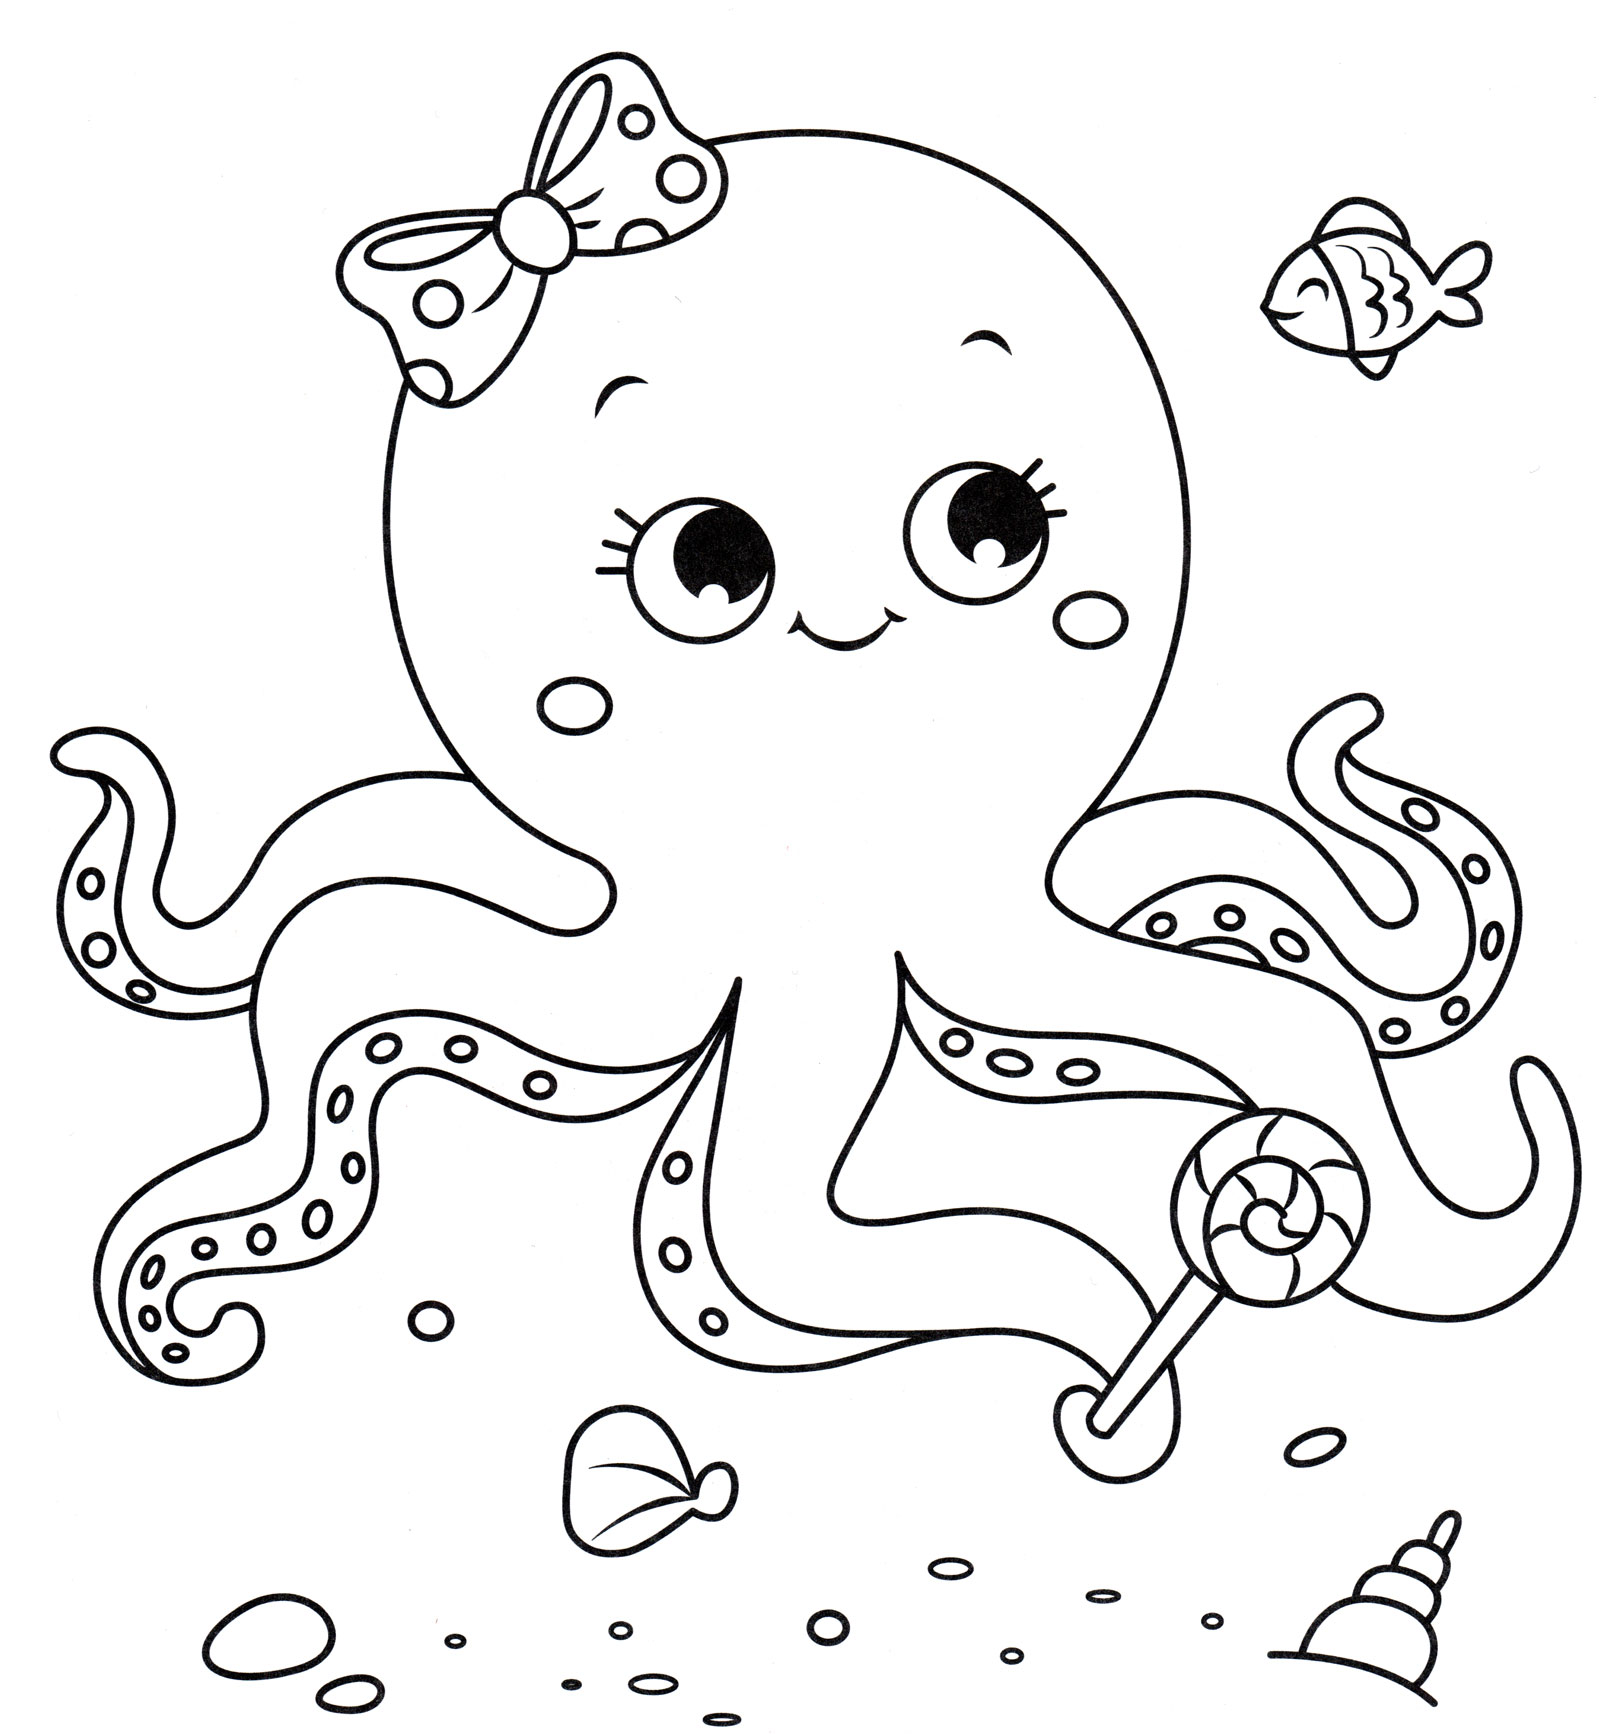 Octopus Coloring Pages